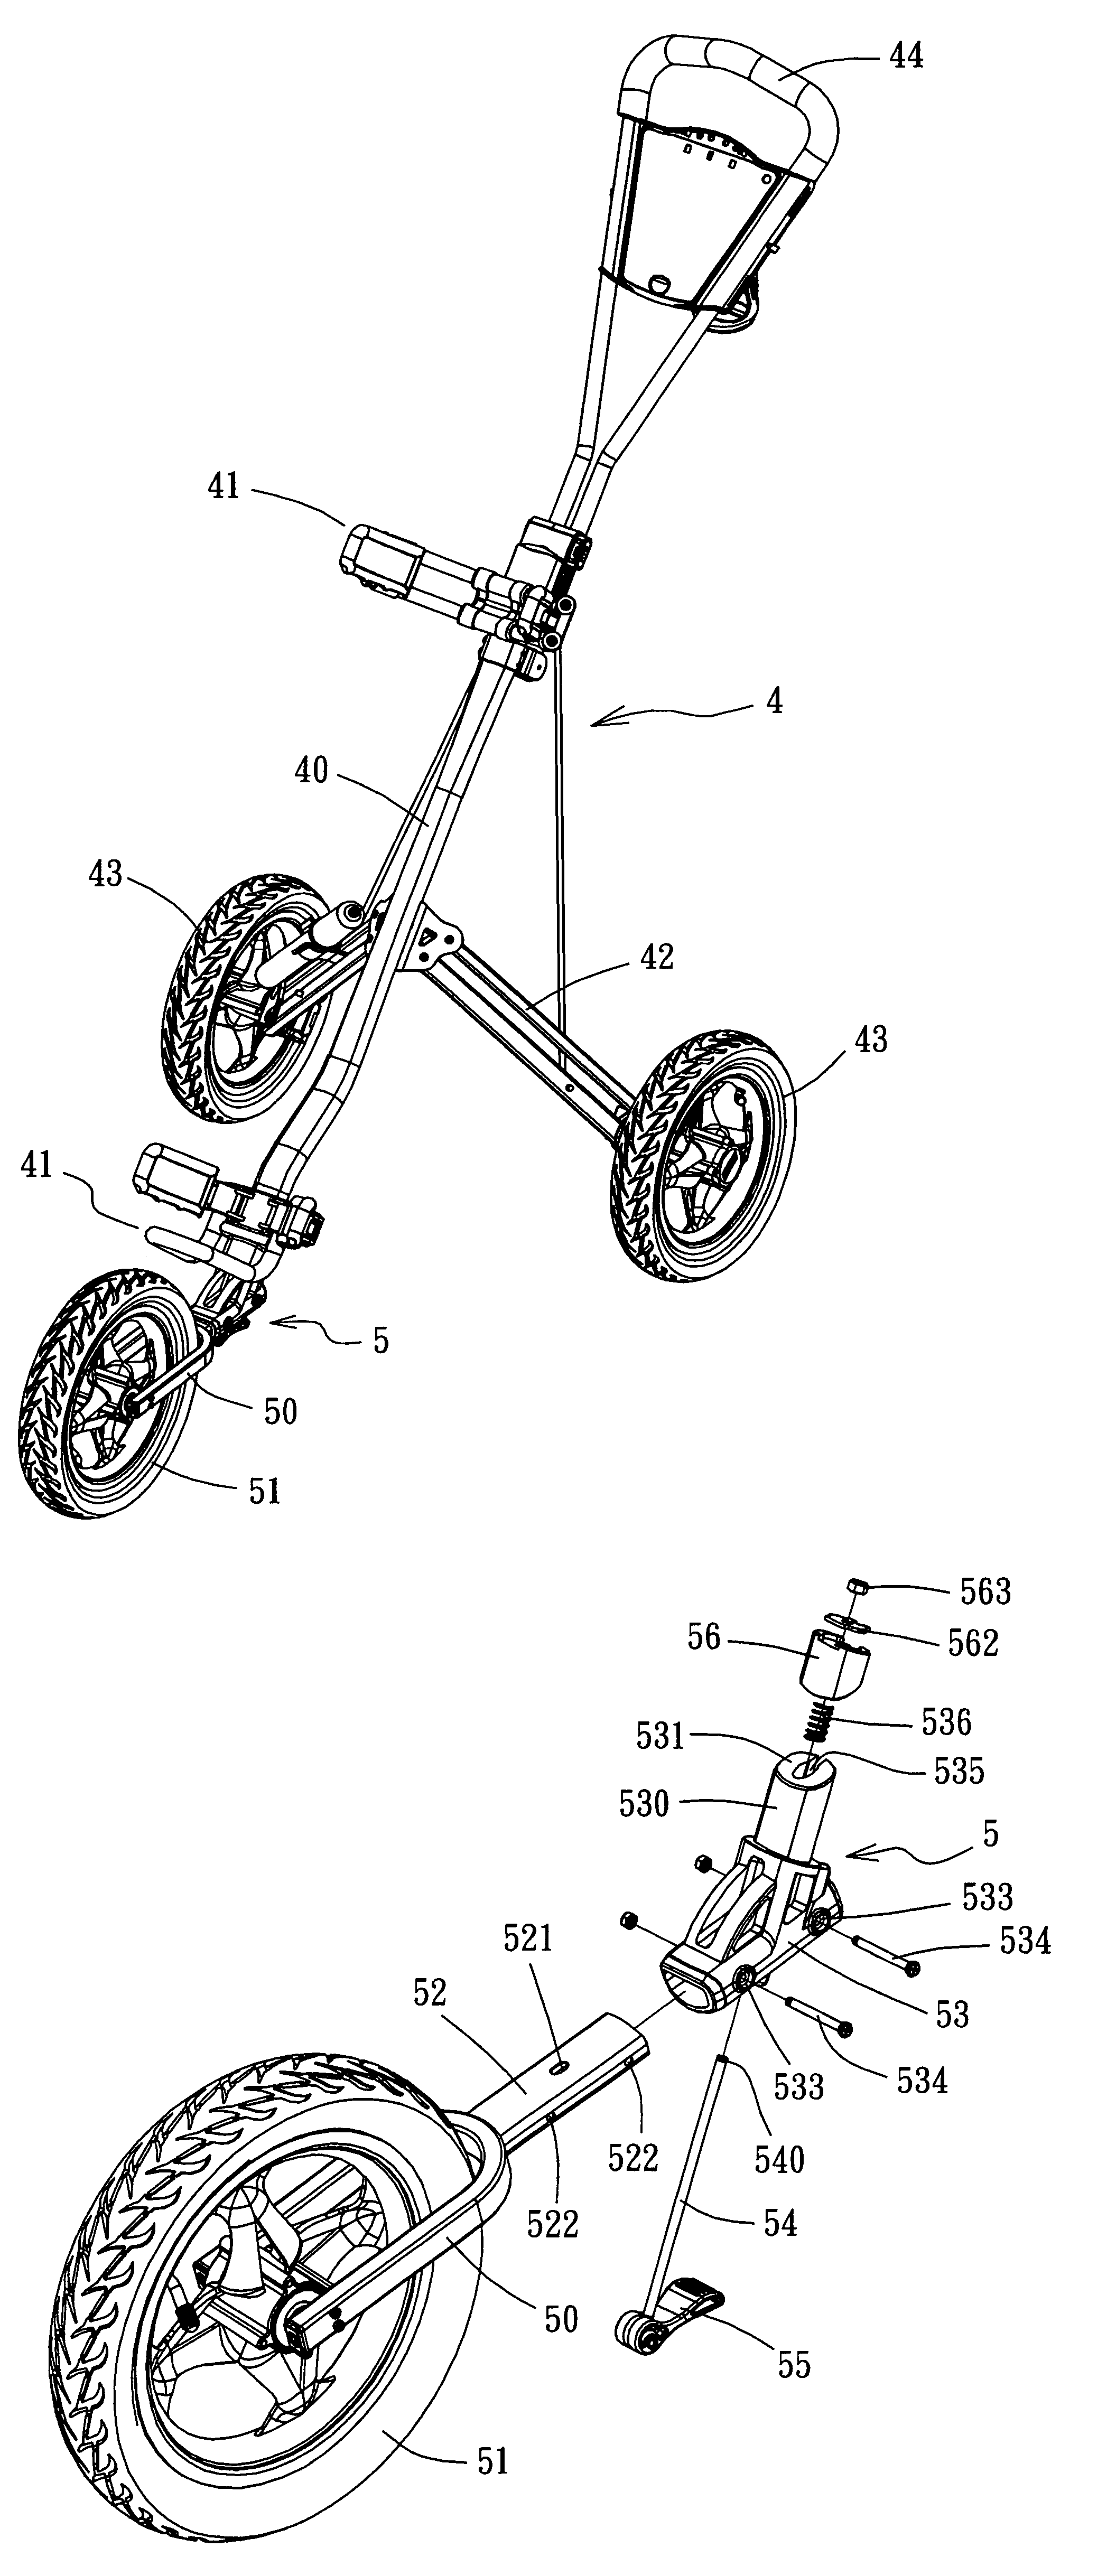 Third wheel collapsing device for a golf club cart